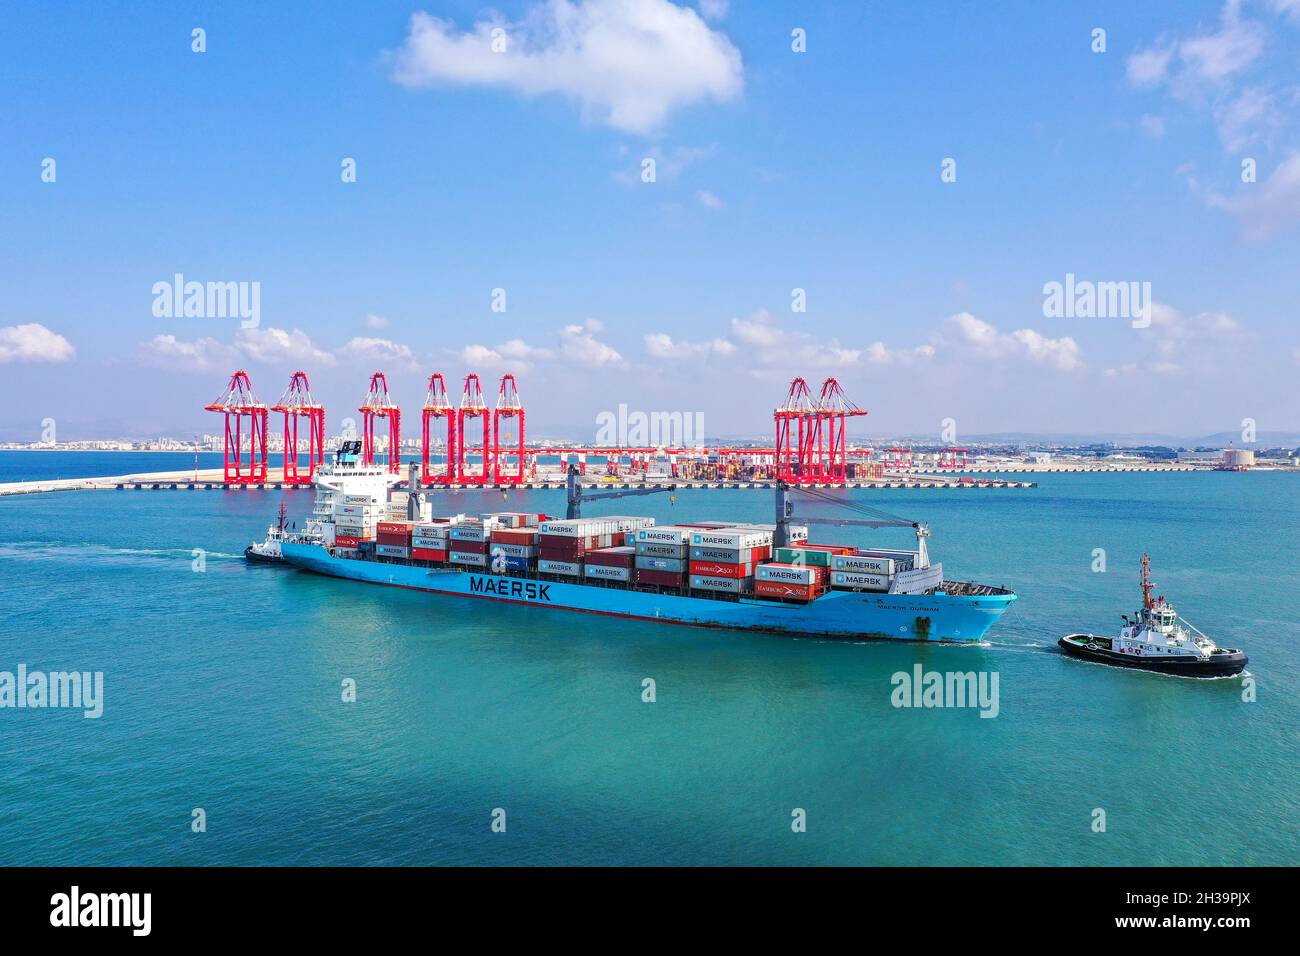 Tug boats directing a Maersk Container ship into a port dock. Stock Photo